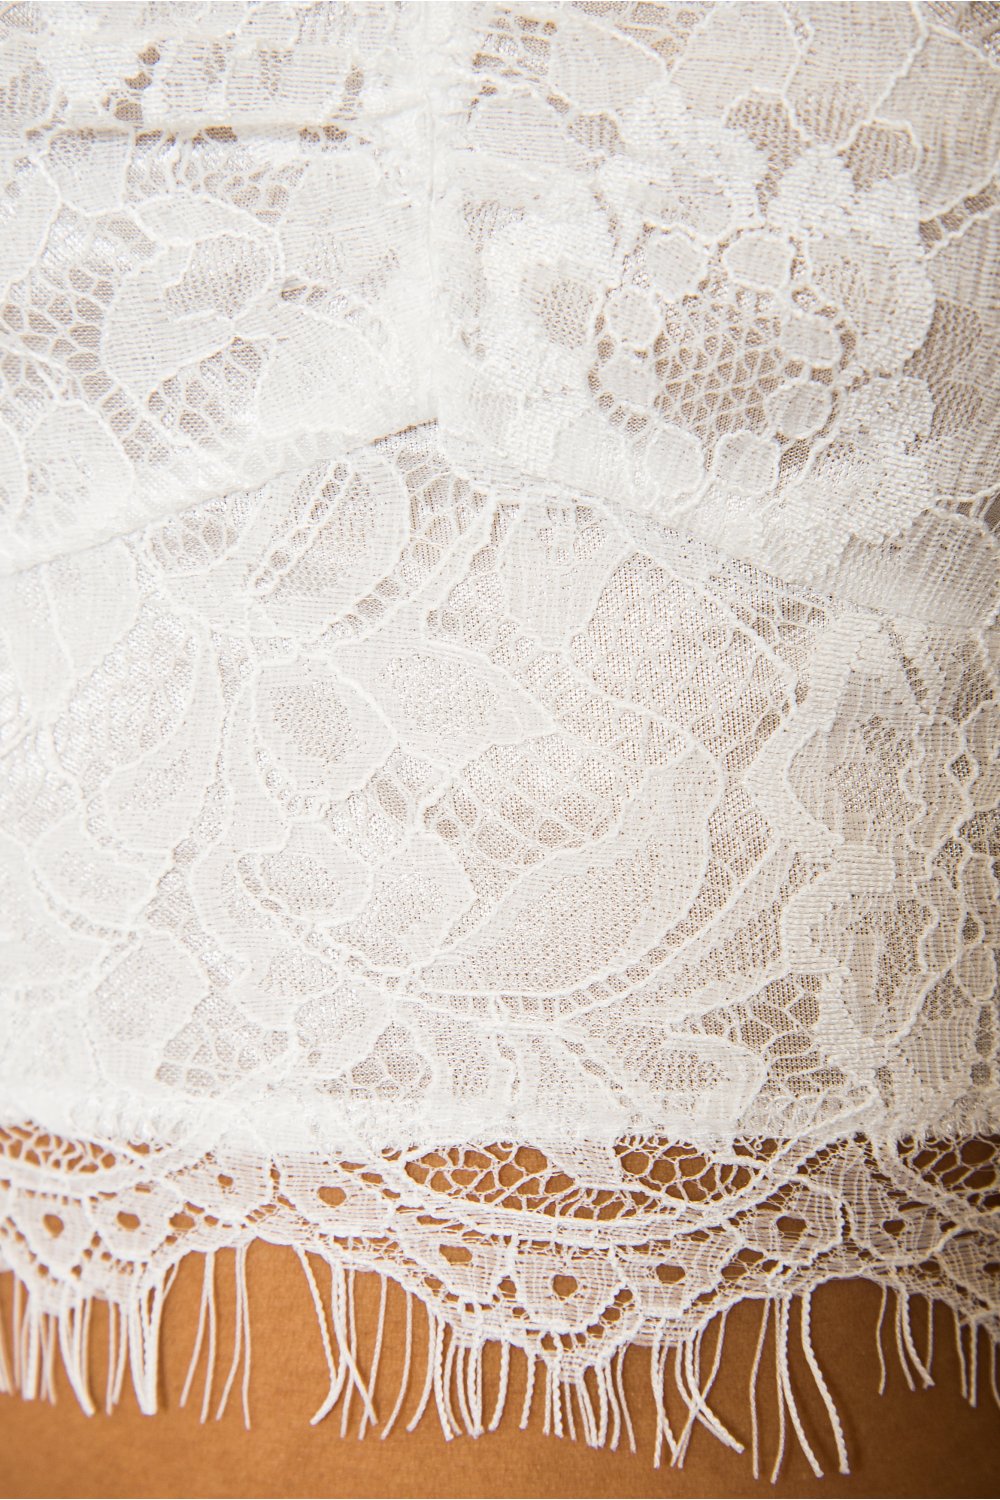 Date Night White Lace Bralet Top – The Fashion Bible